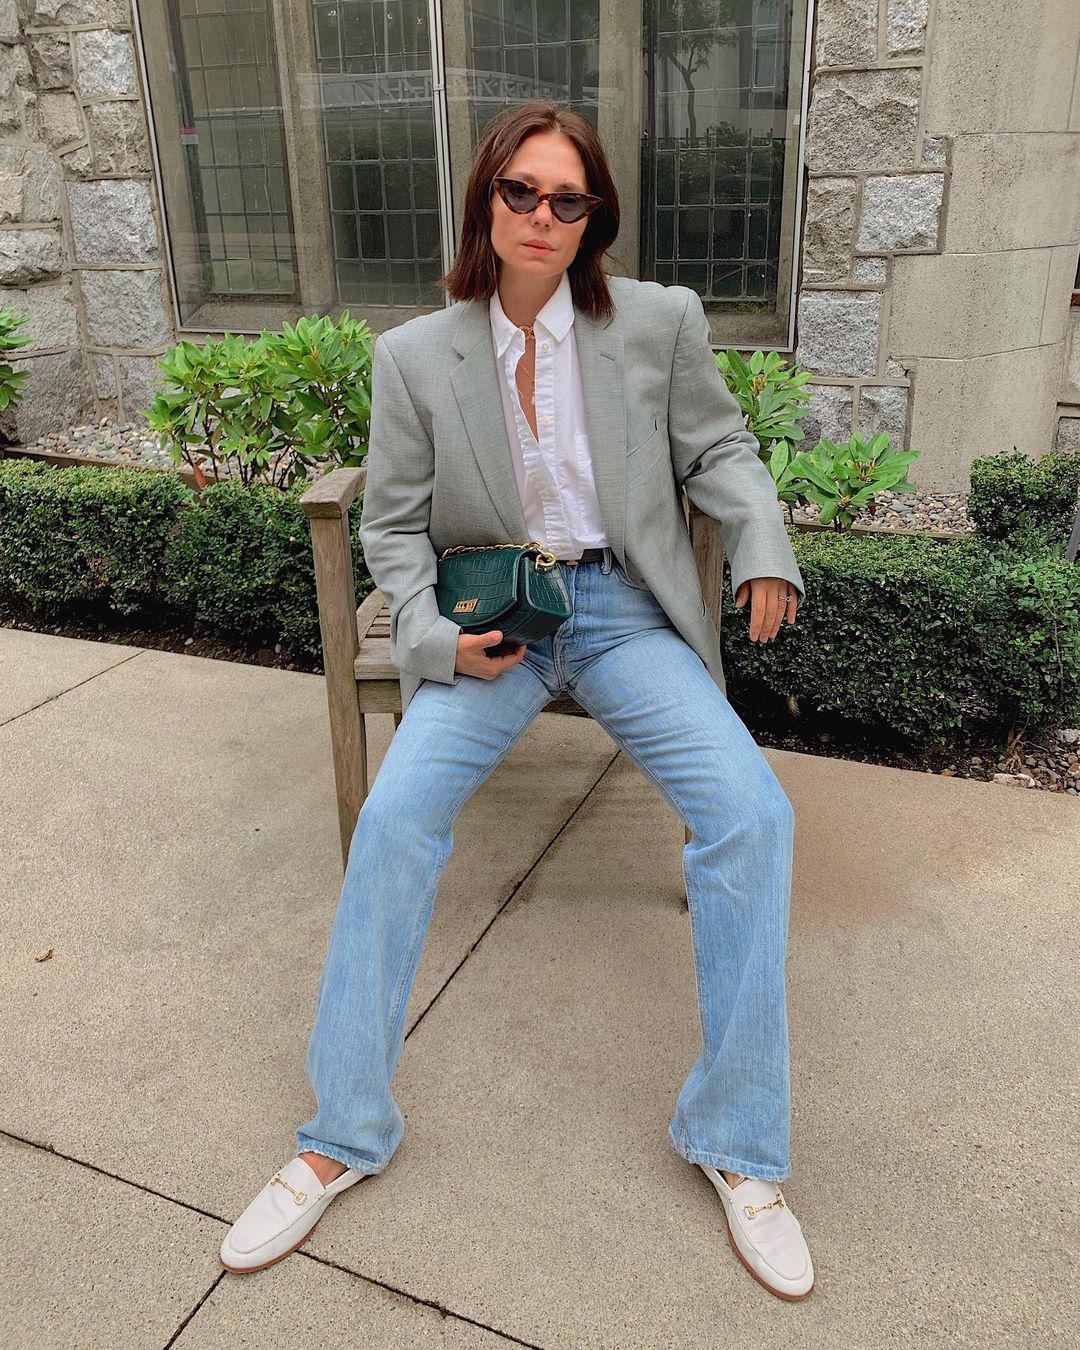 This Cool Outfit is One to Copy for Fall — @aurelafashionista in wide-leg jeans, flat white loafers, white button-down shirt, an oversized grey blazer, and cat-eye sunglasses